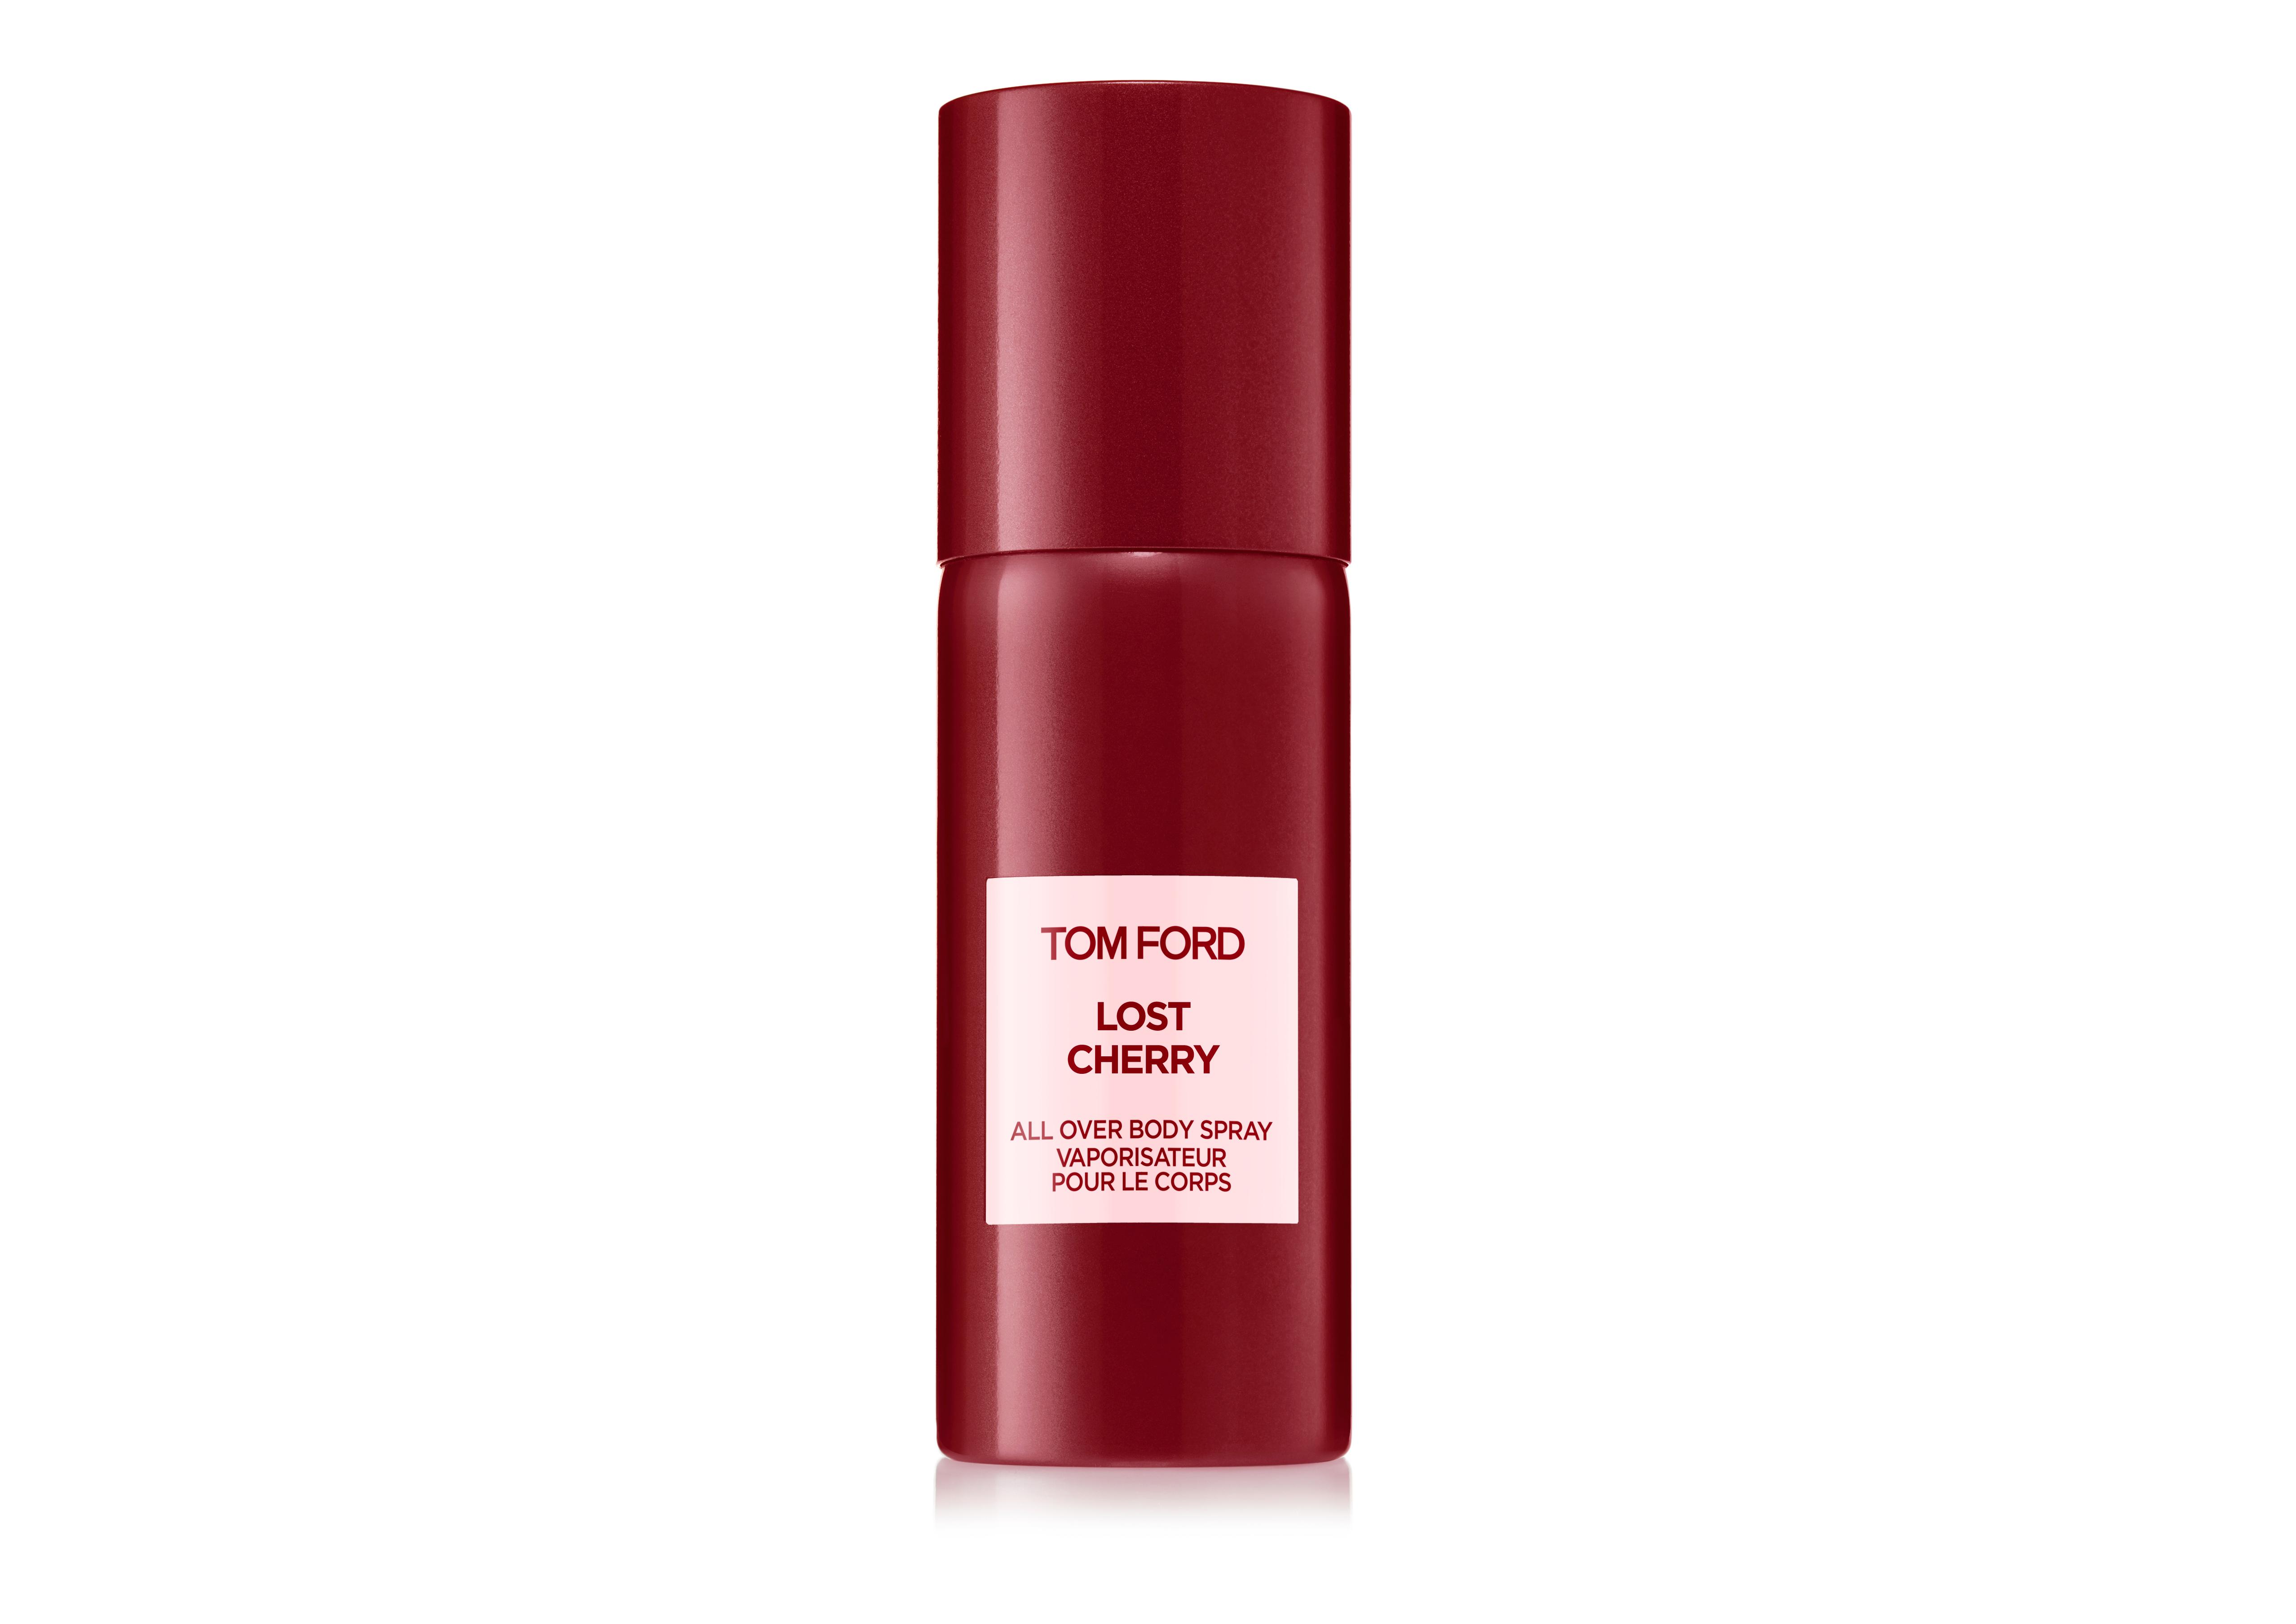 Tom Ford LOST CHERRY ALL OVER BODY SPRAY 